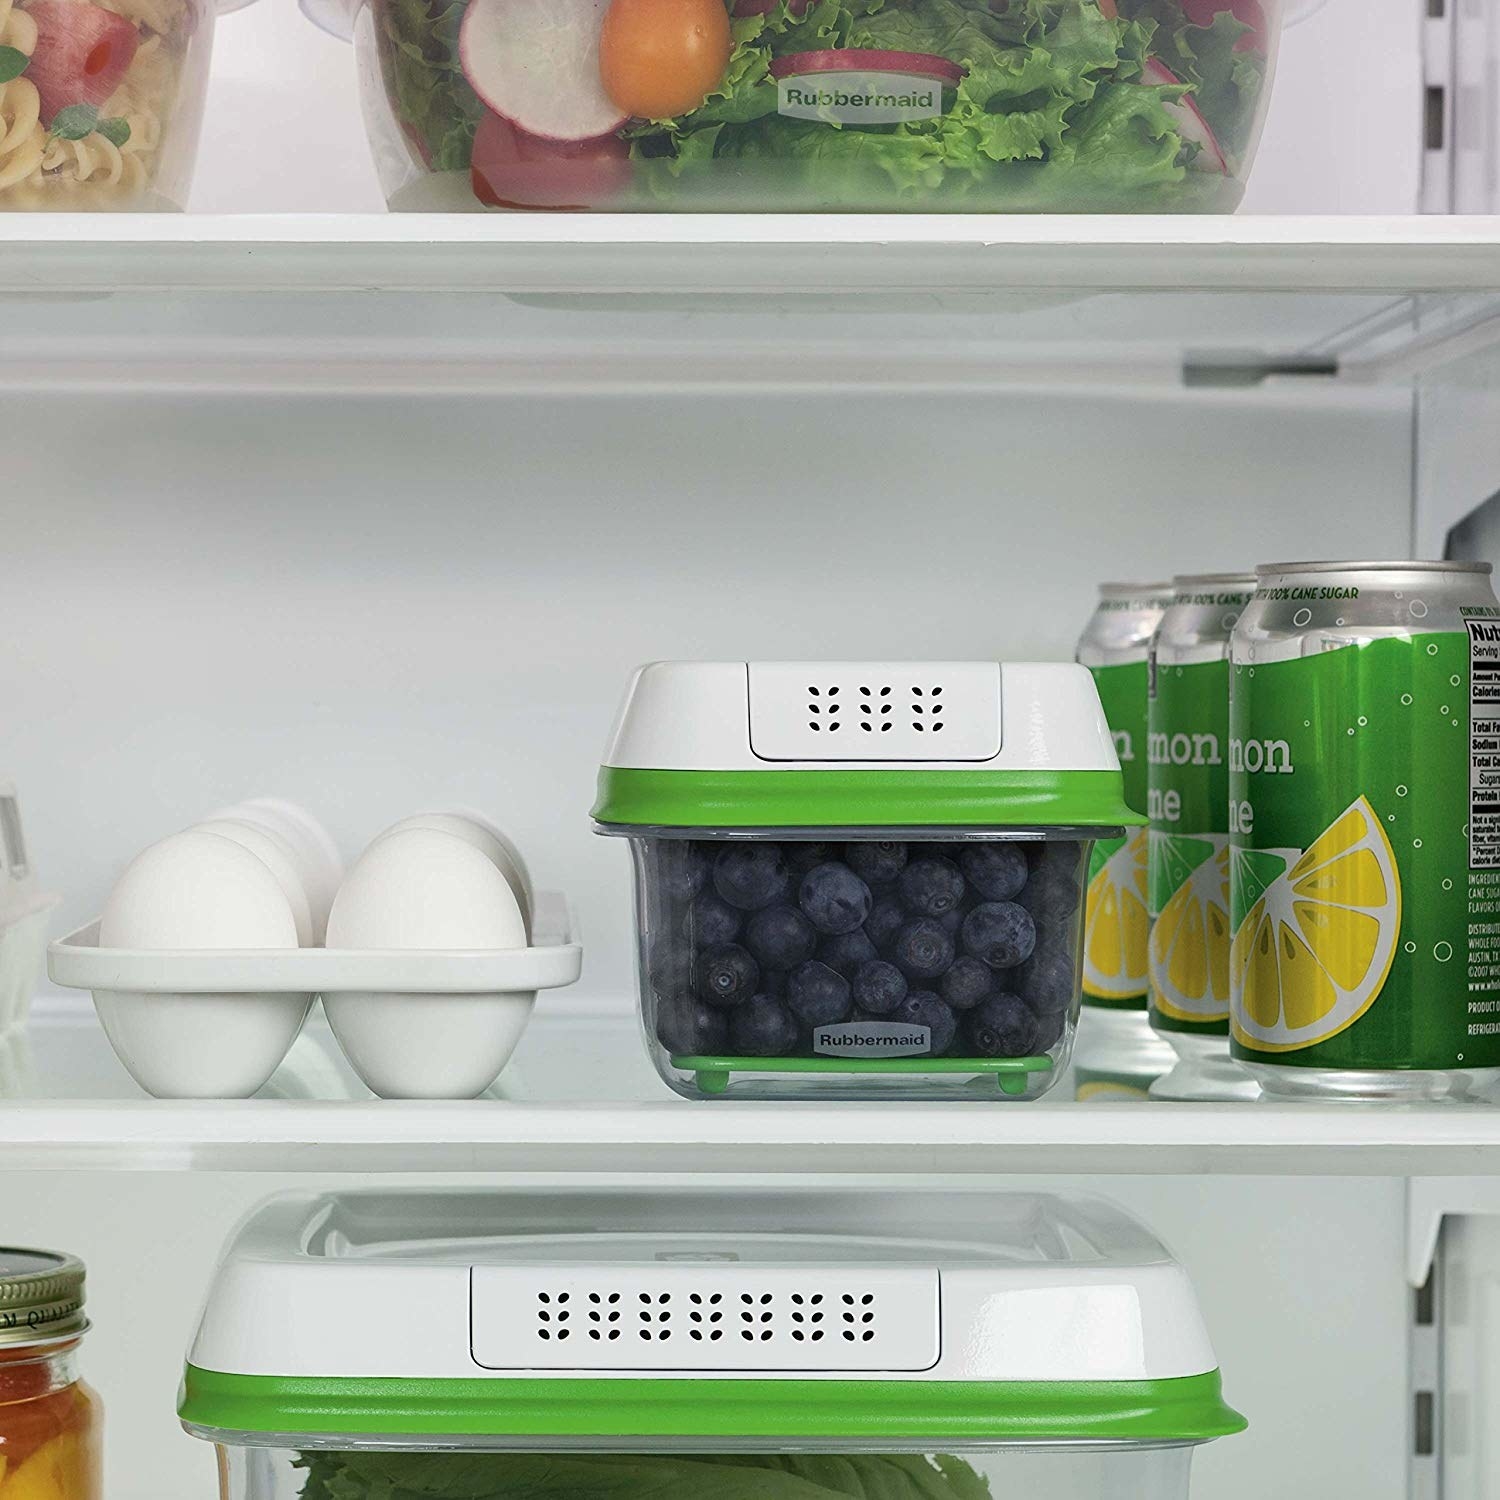 The containers storing produce in a fridge